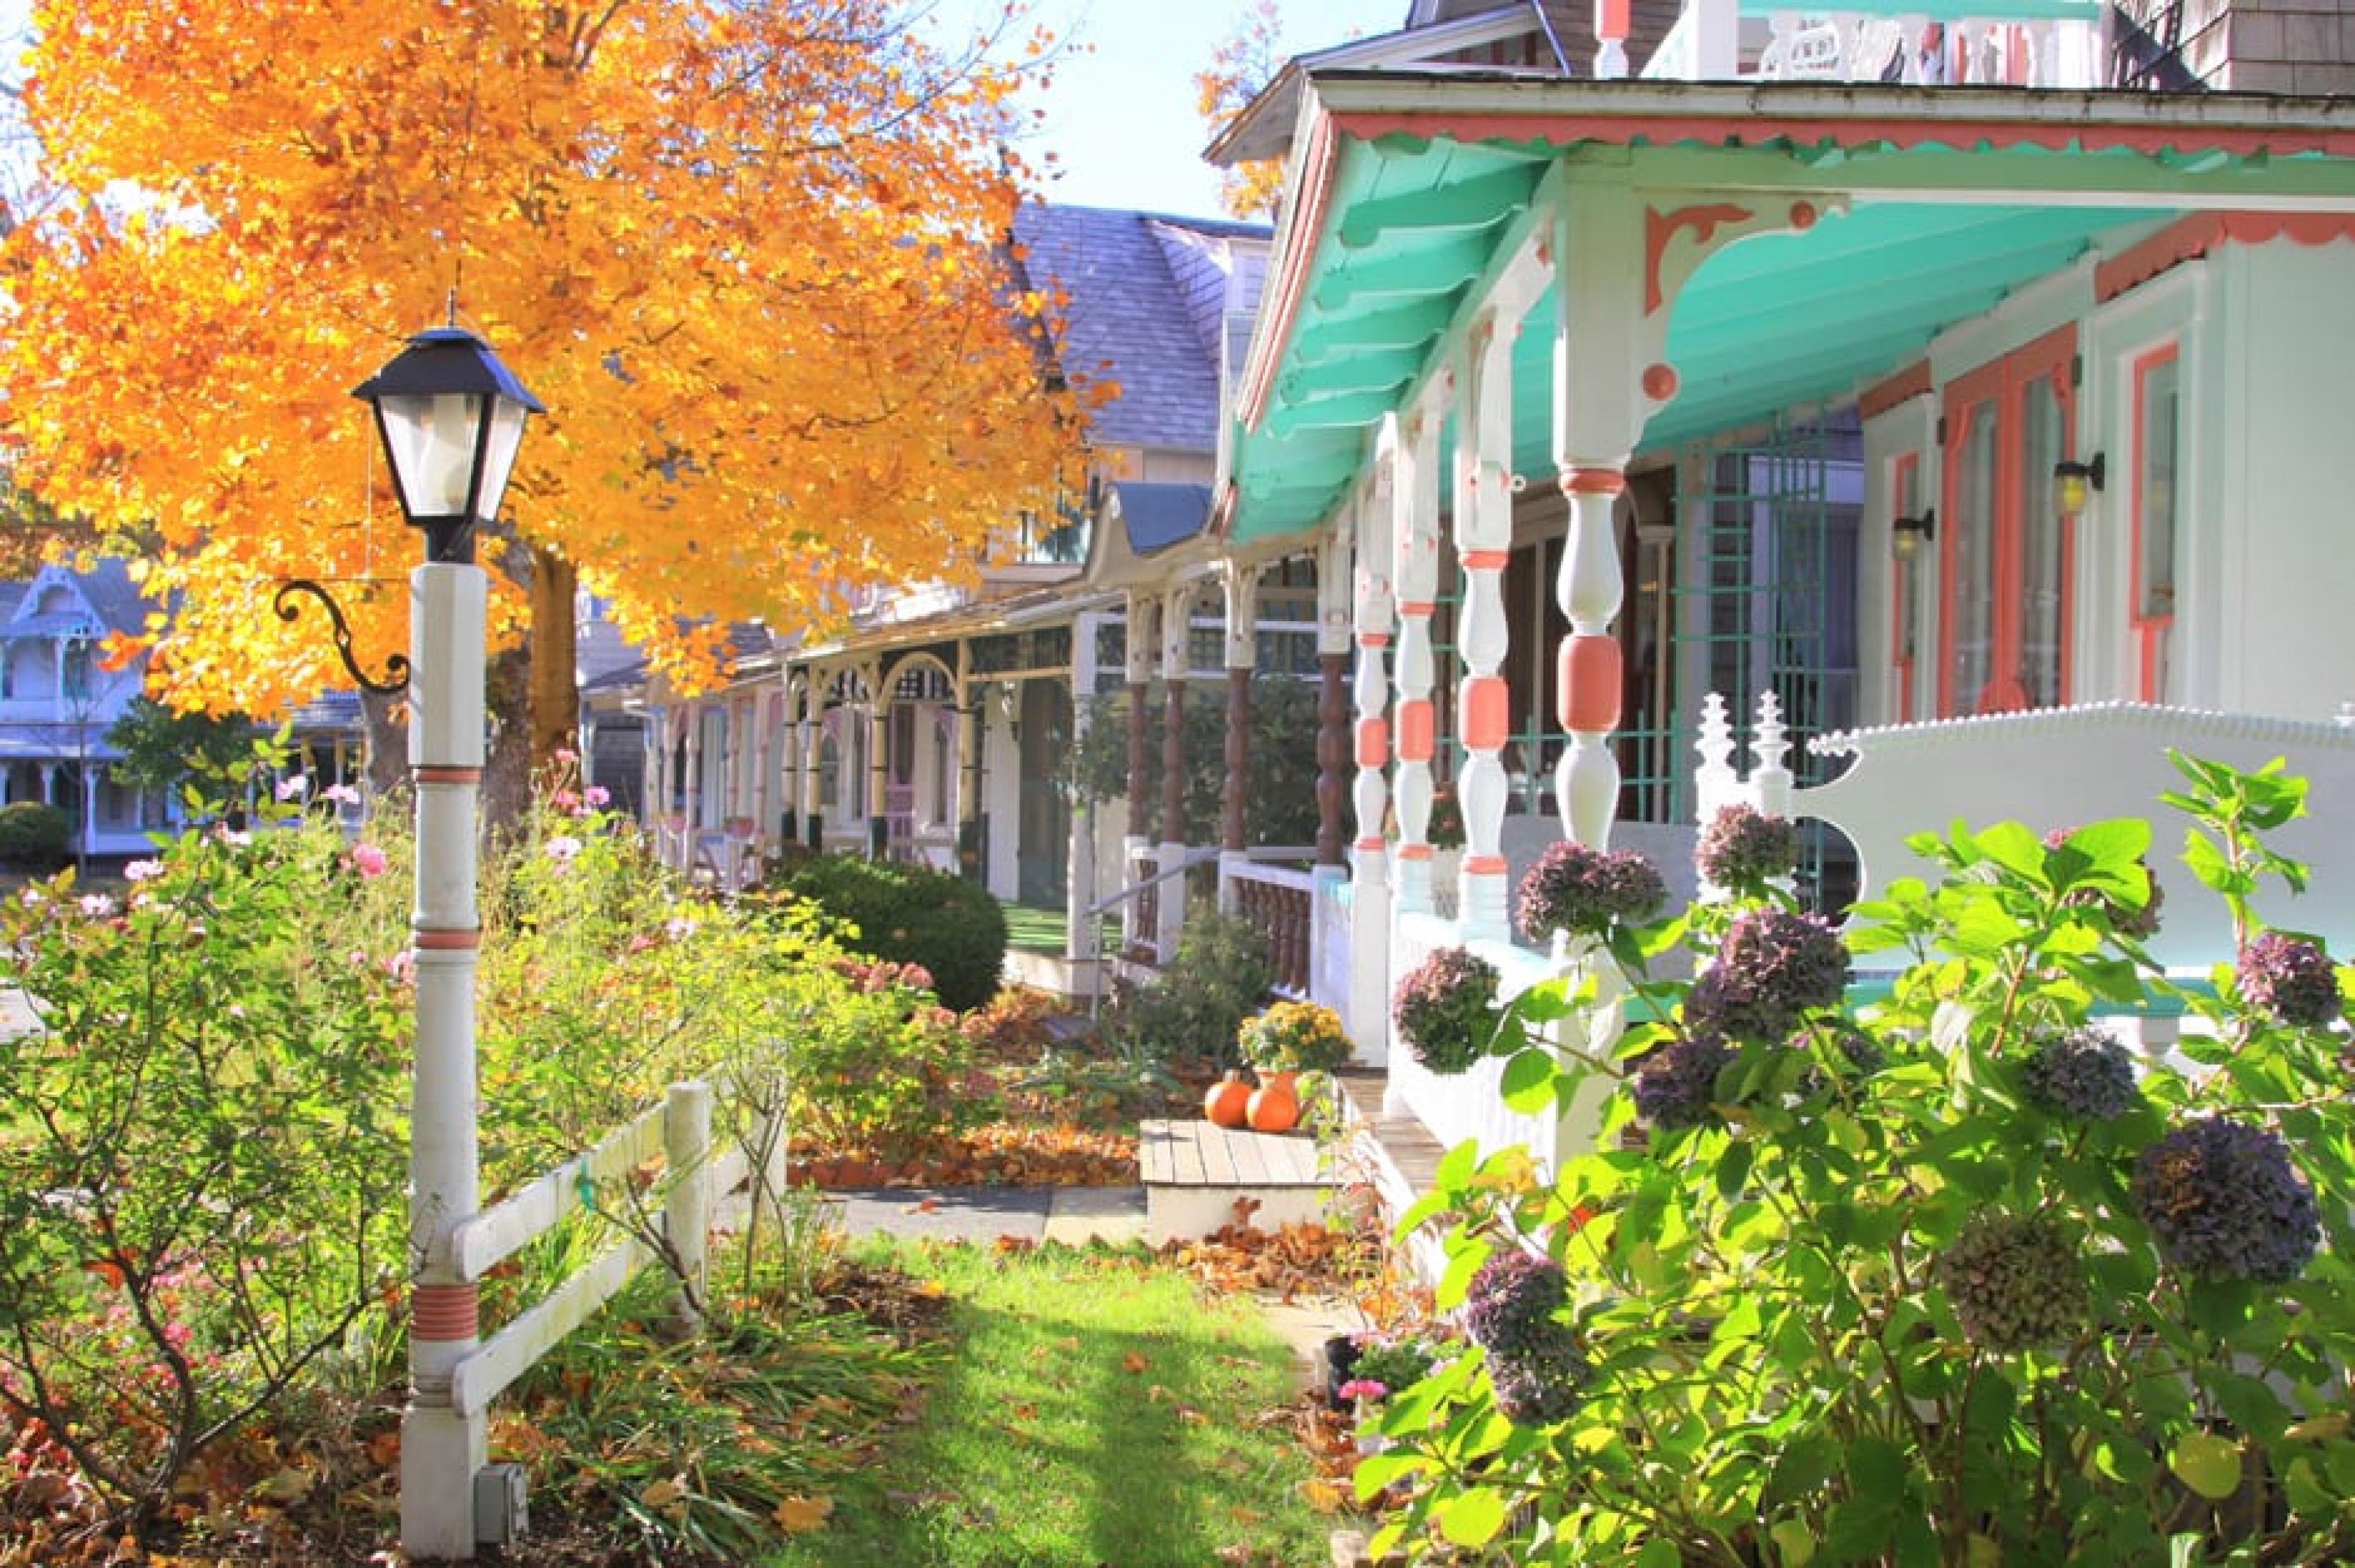 Exterior View - Gingerbread Cottages,Martha's Vineyard, New England - Courtesy of Martha's Vineyard Chamber of Commerce